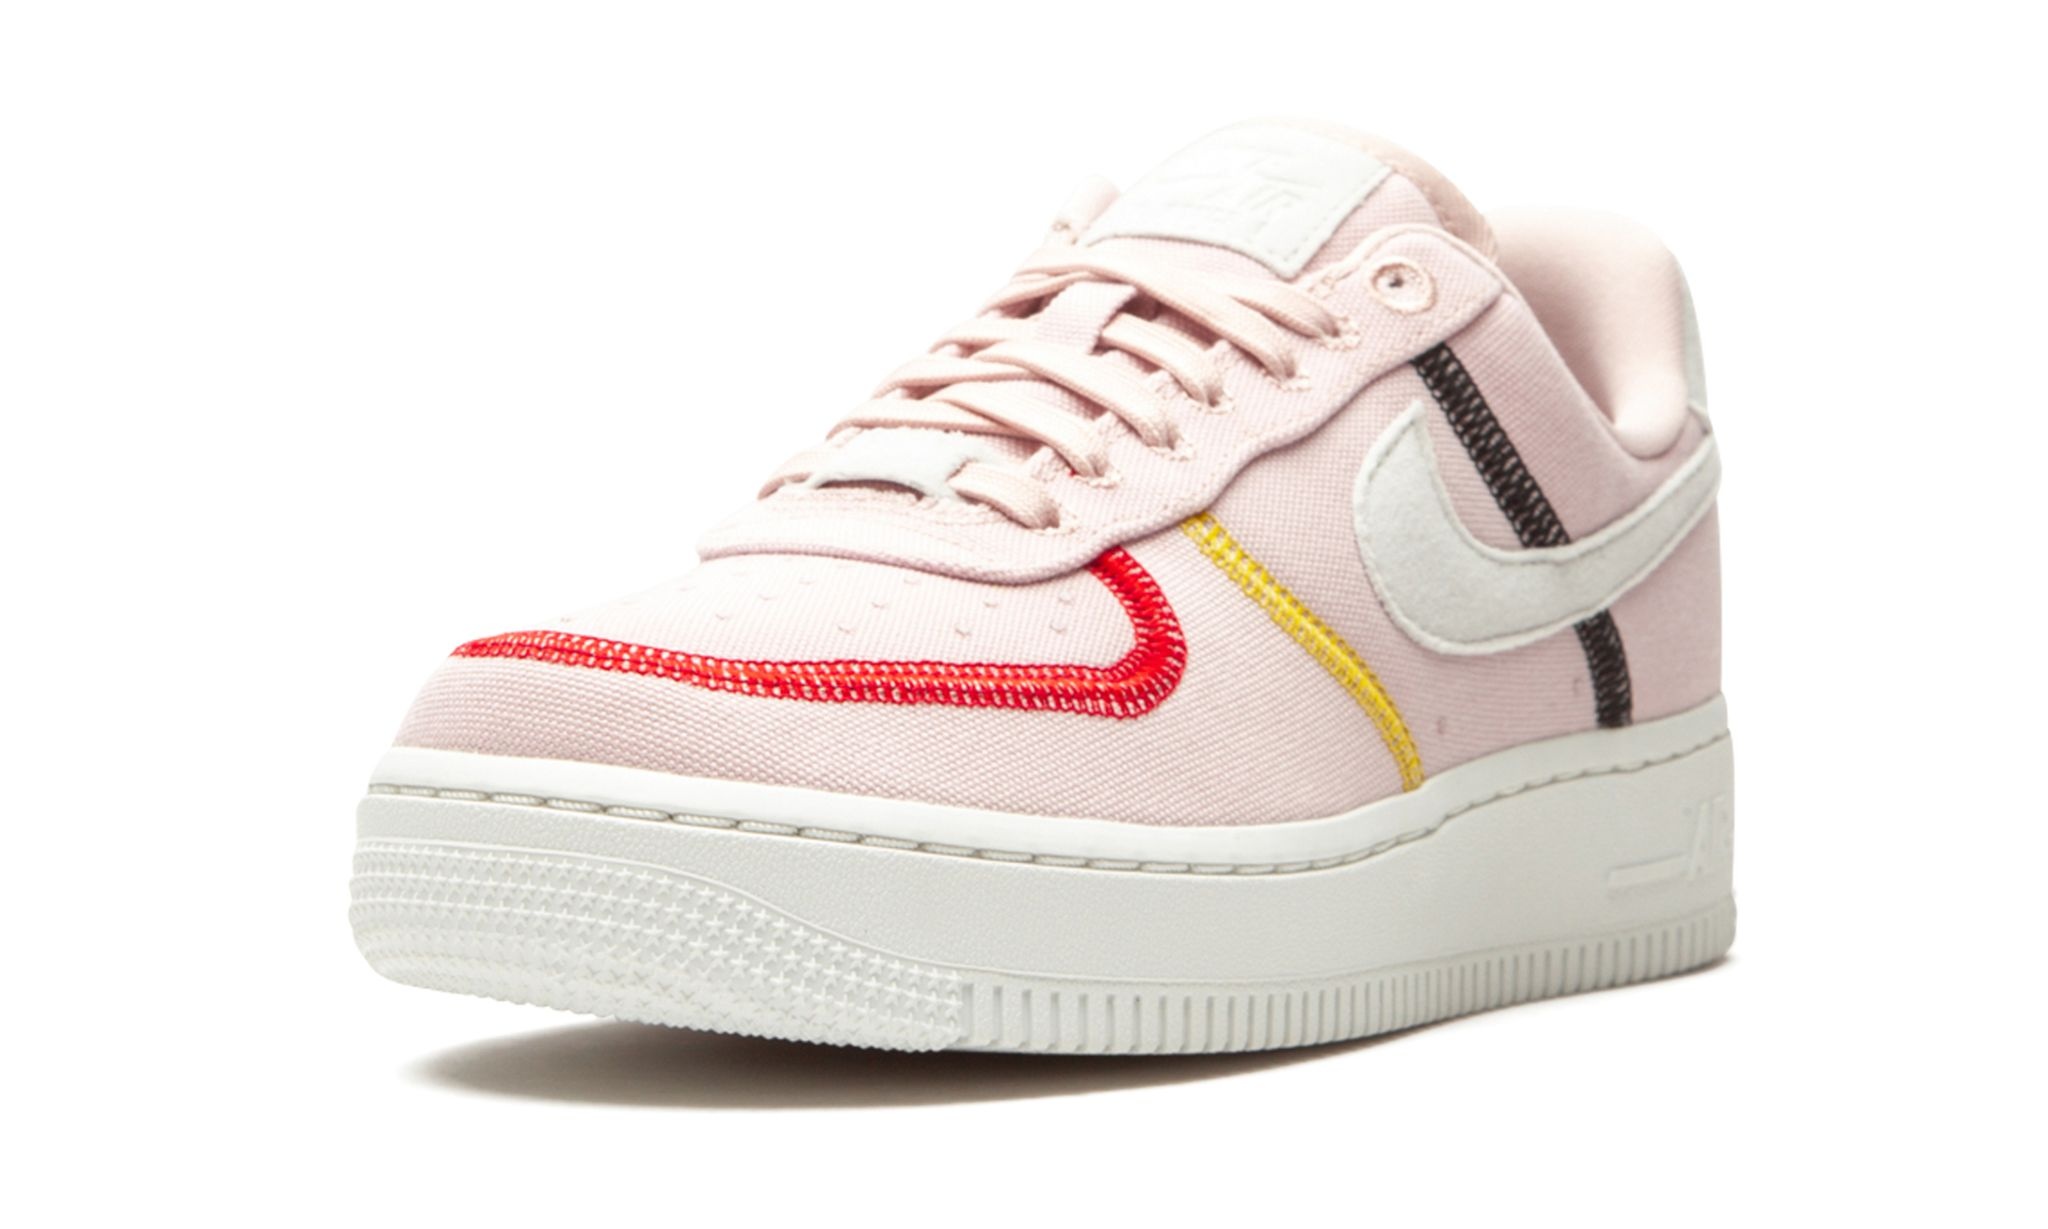 WMNS Air Force 1 "07 LX "Stitched Canvas - Silt Red" - 4